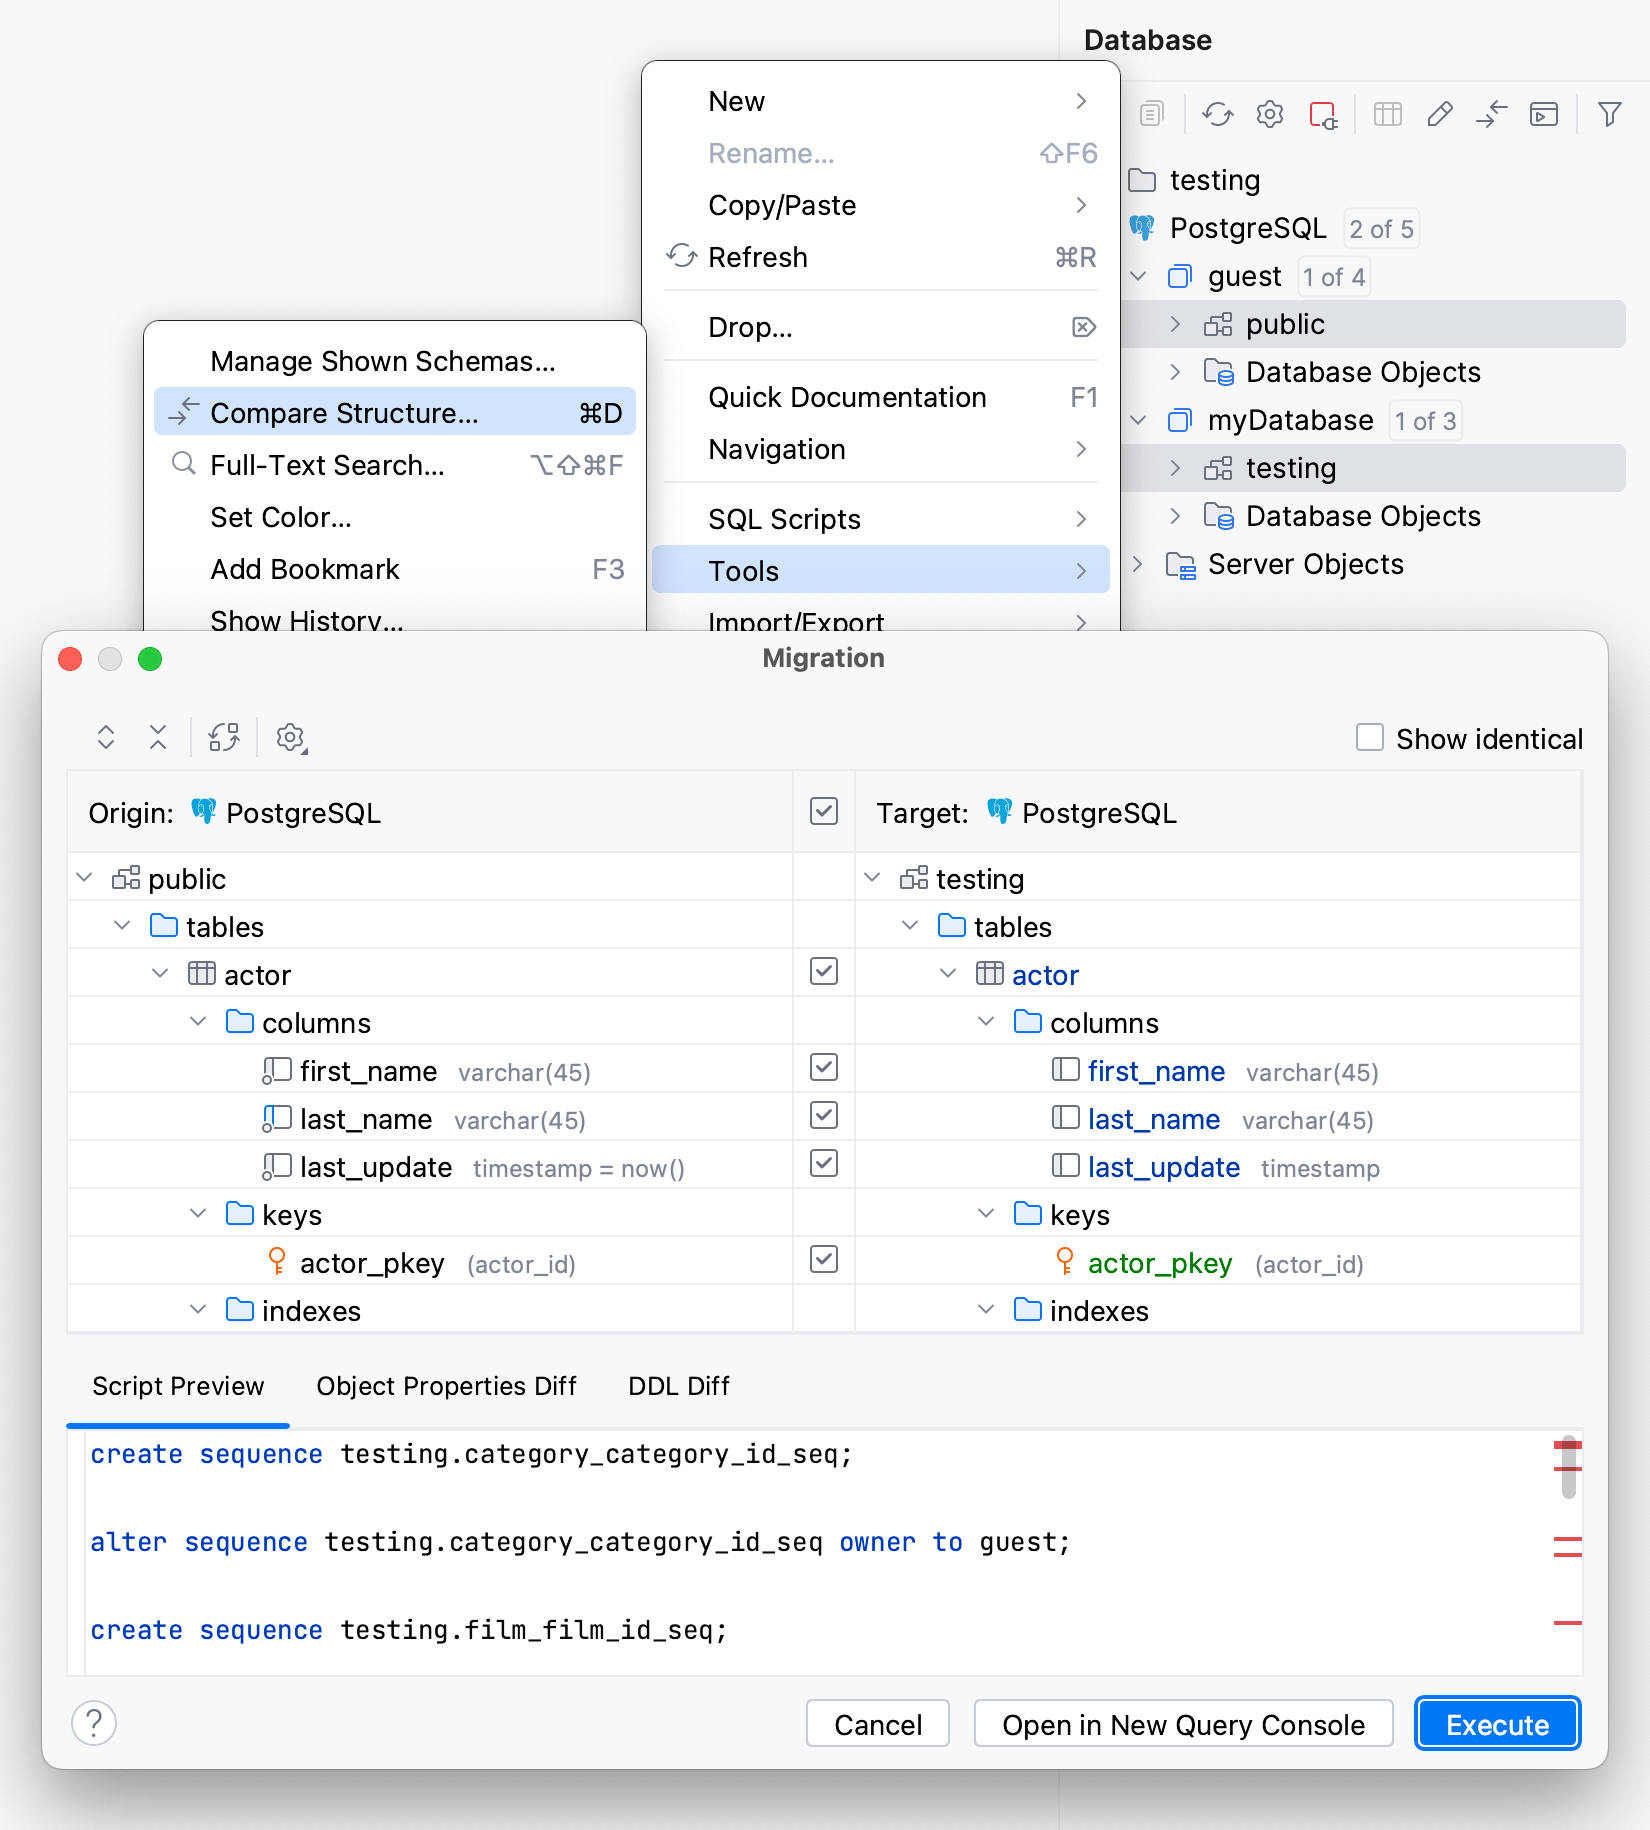 Differences between objects in the Migration dialog